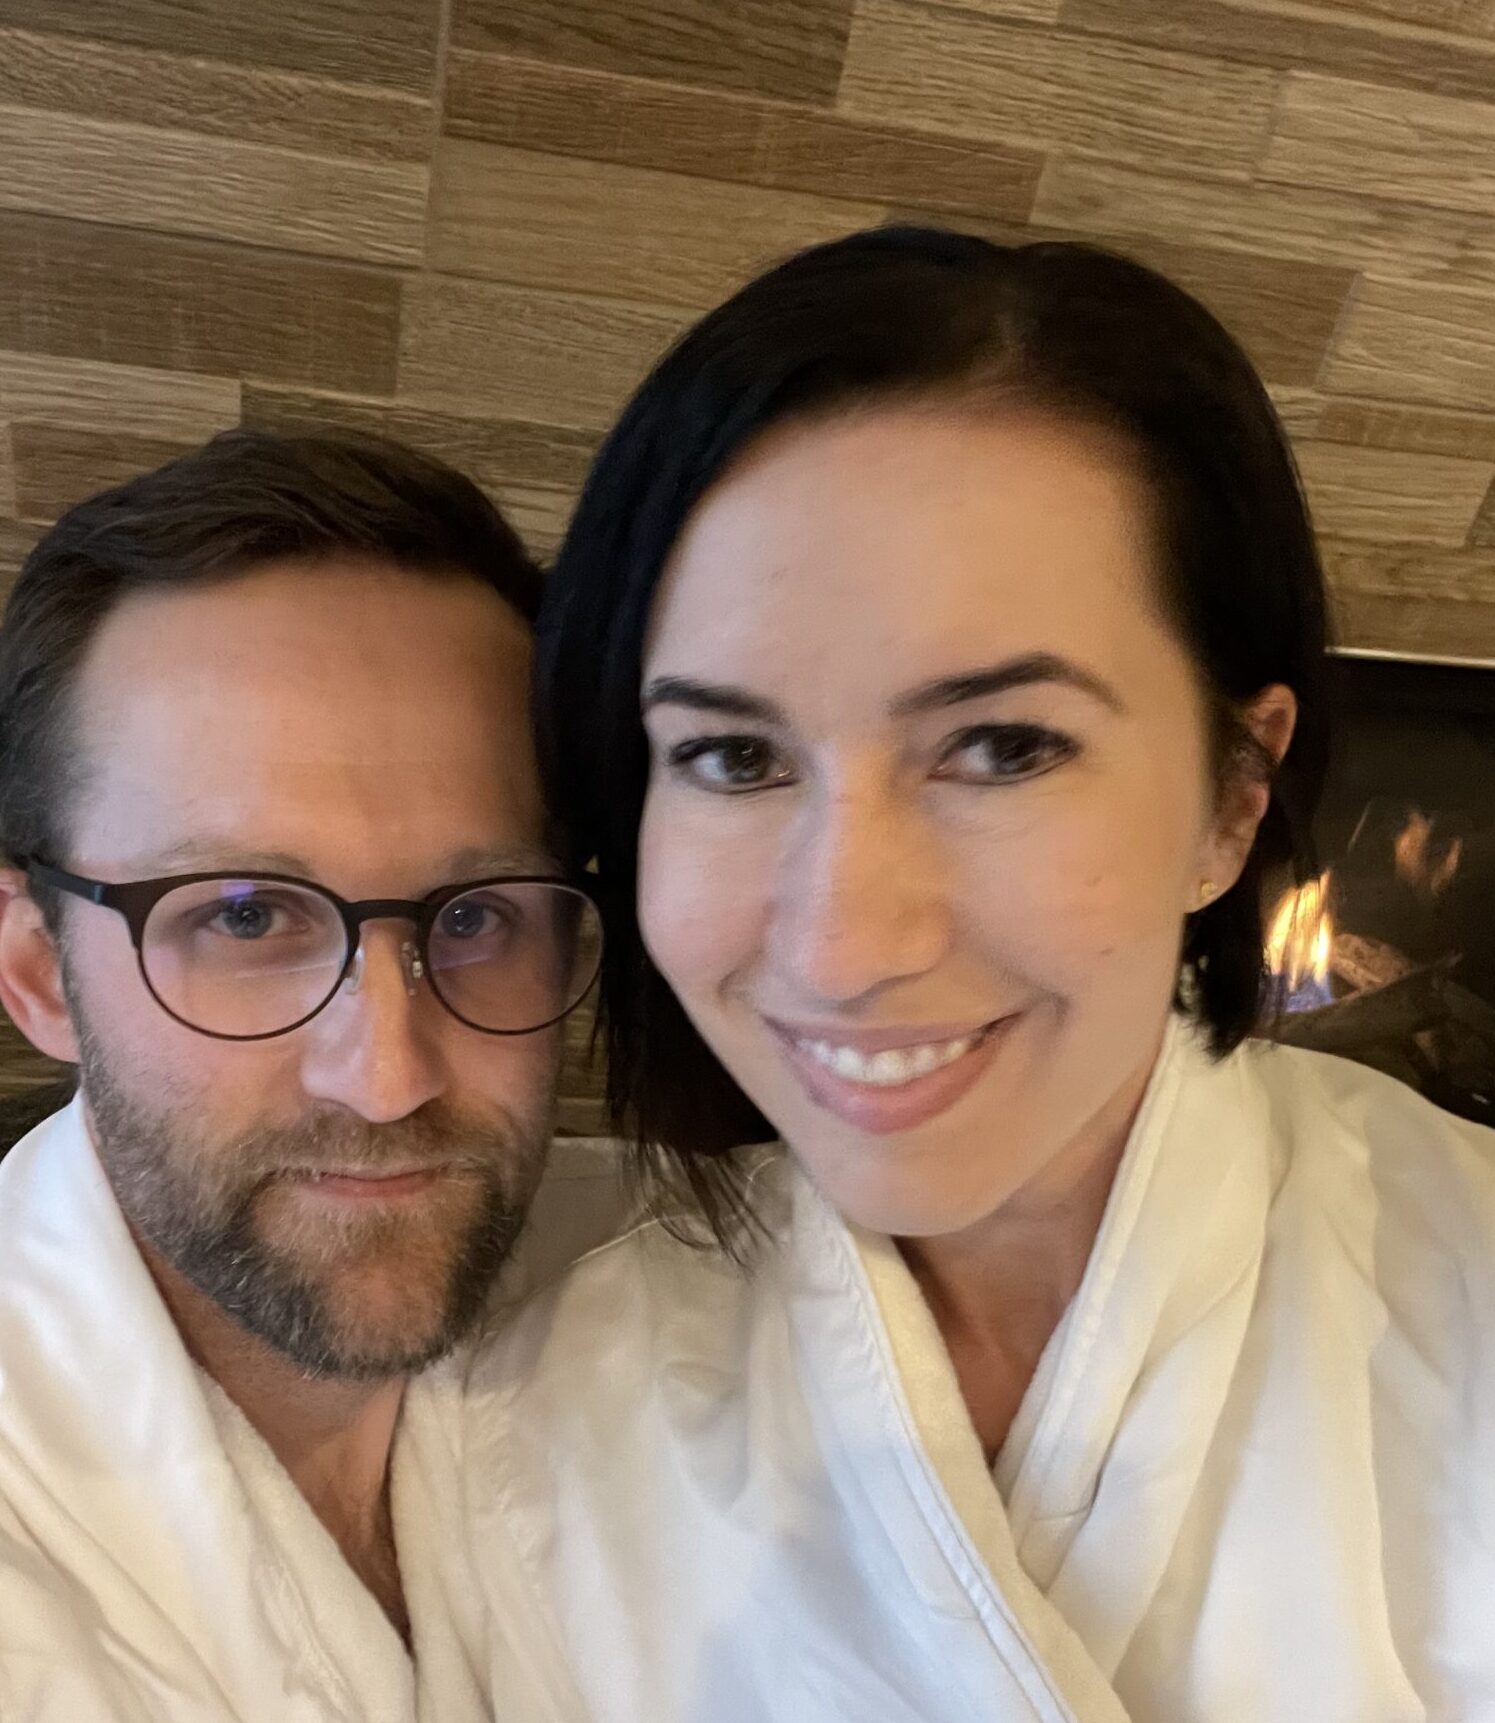 My husband & I in our robes - you wear them the whole time you're at Sundara!